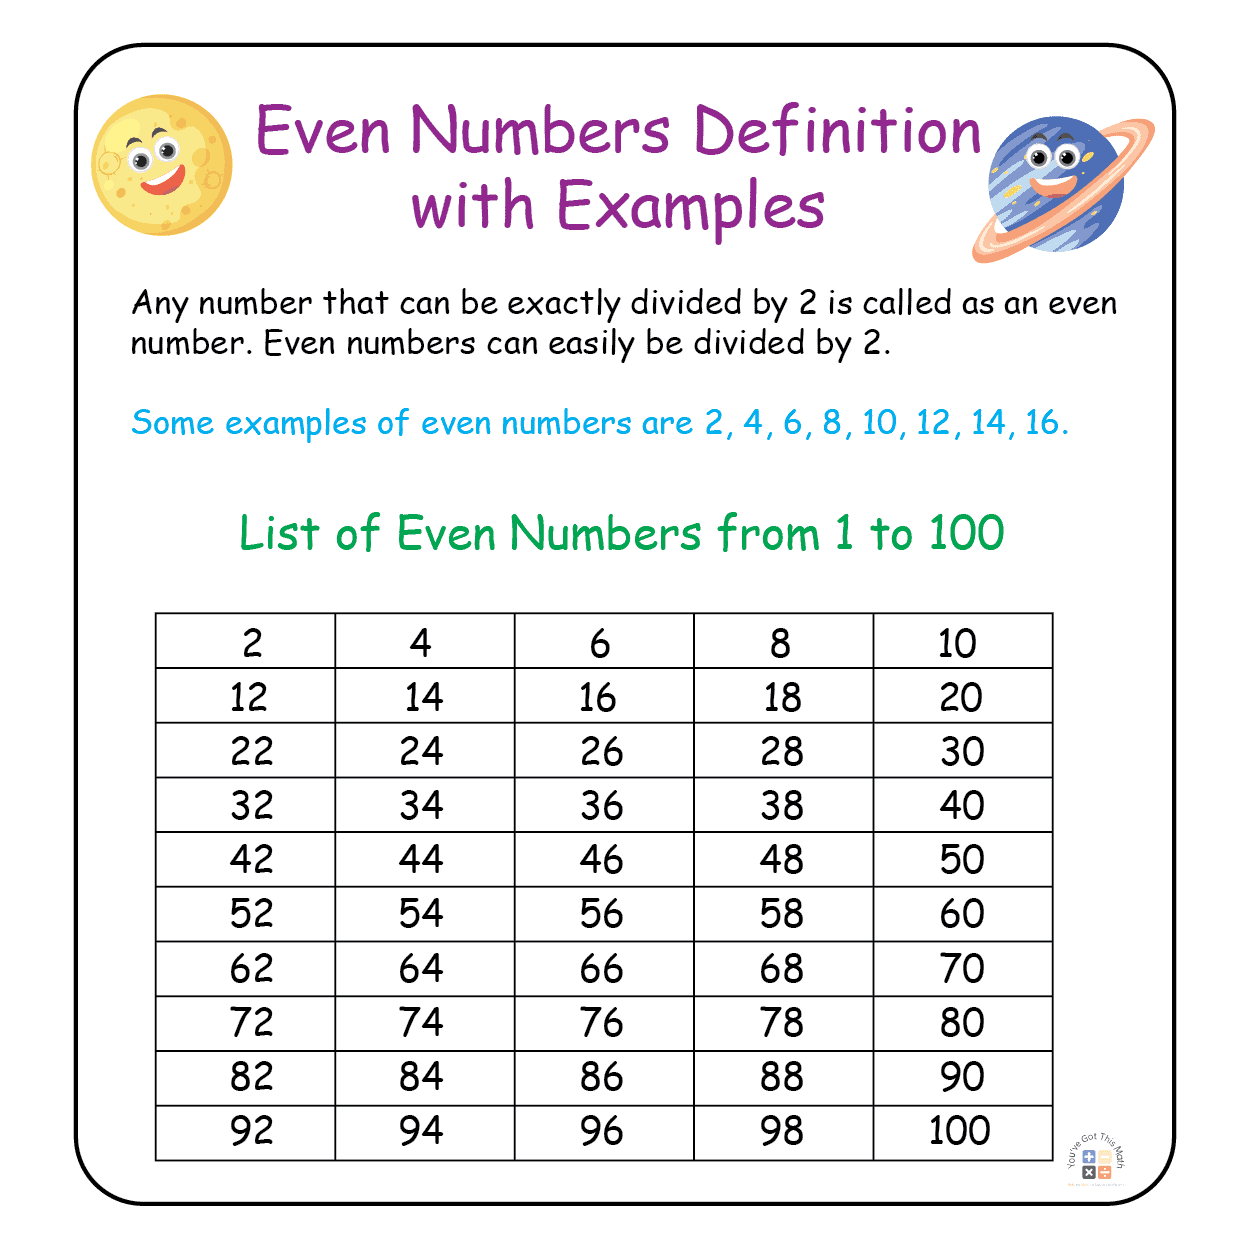 even numbers definition with example